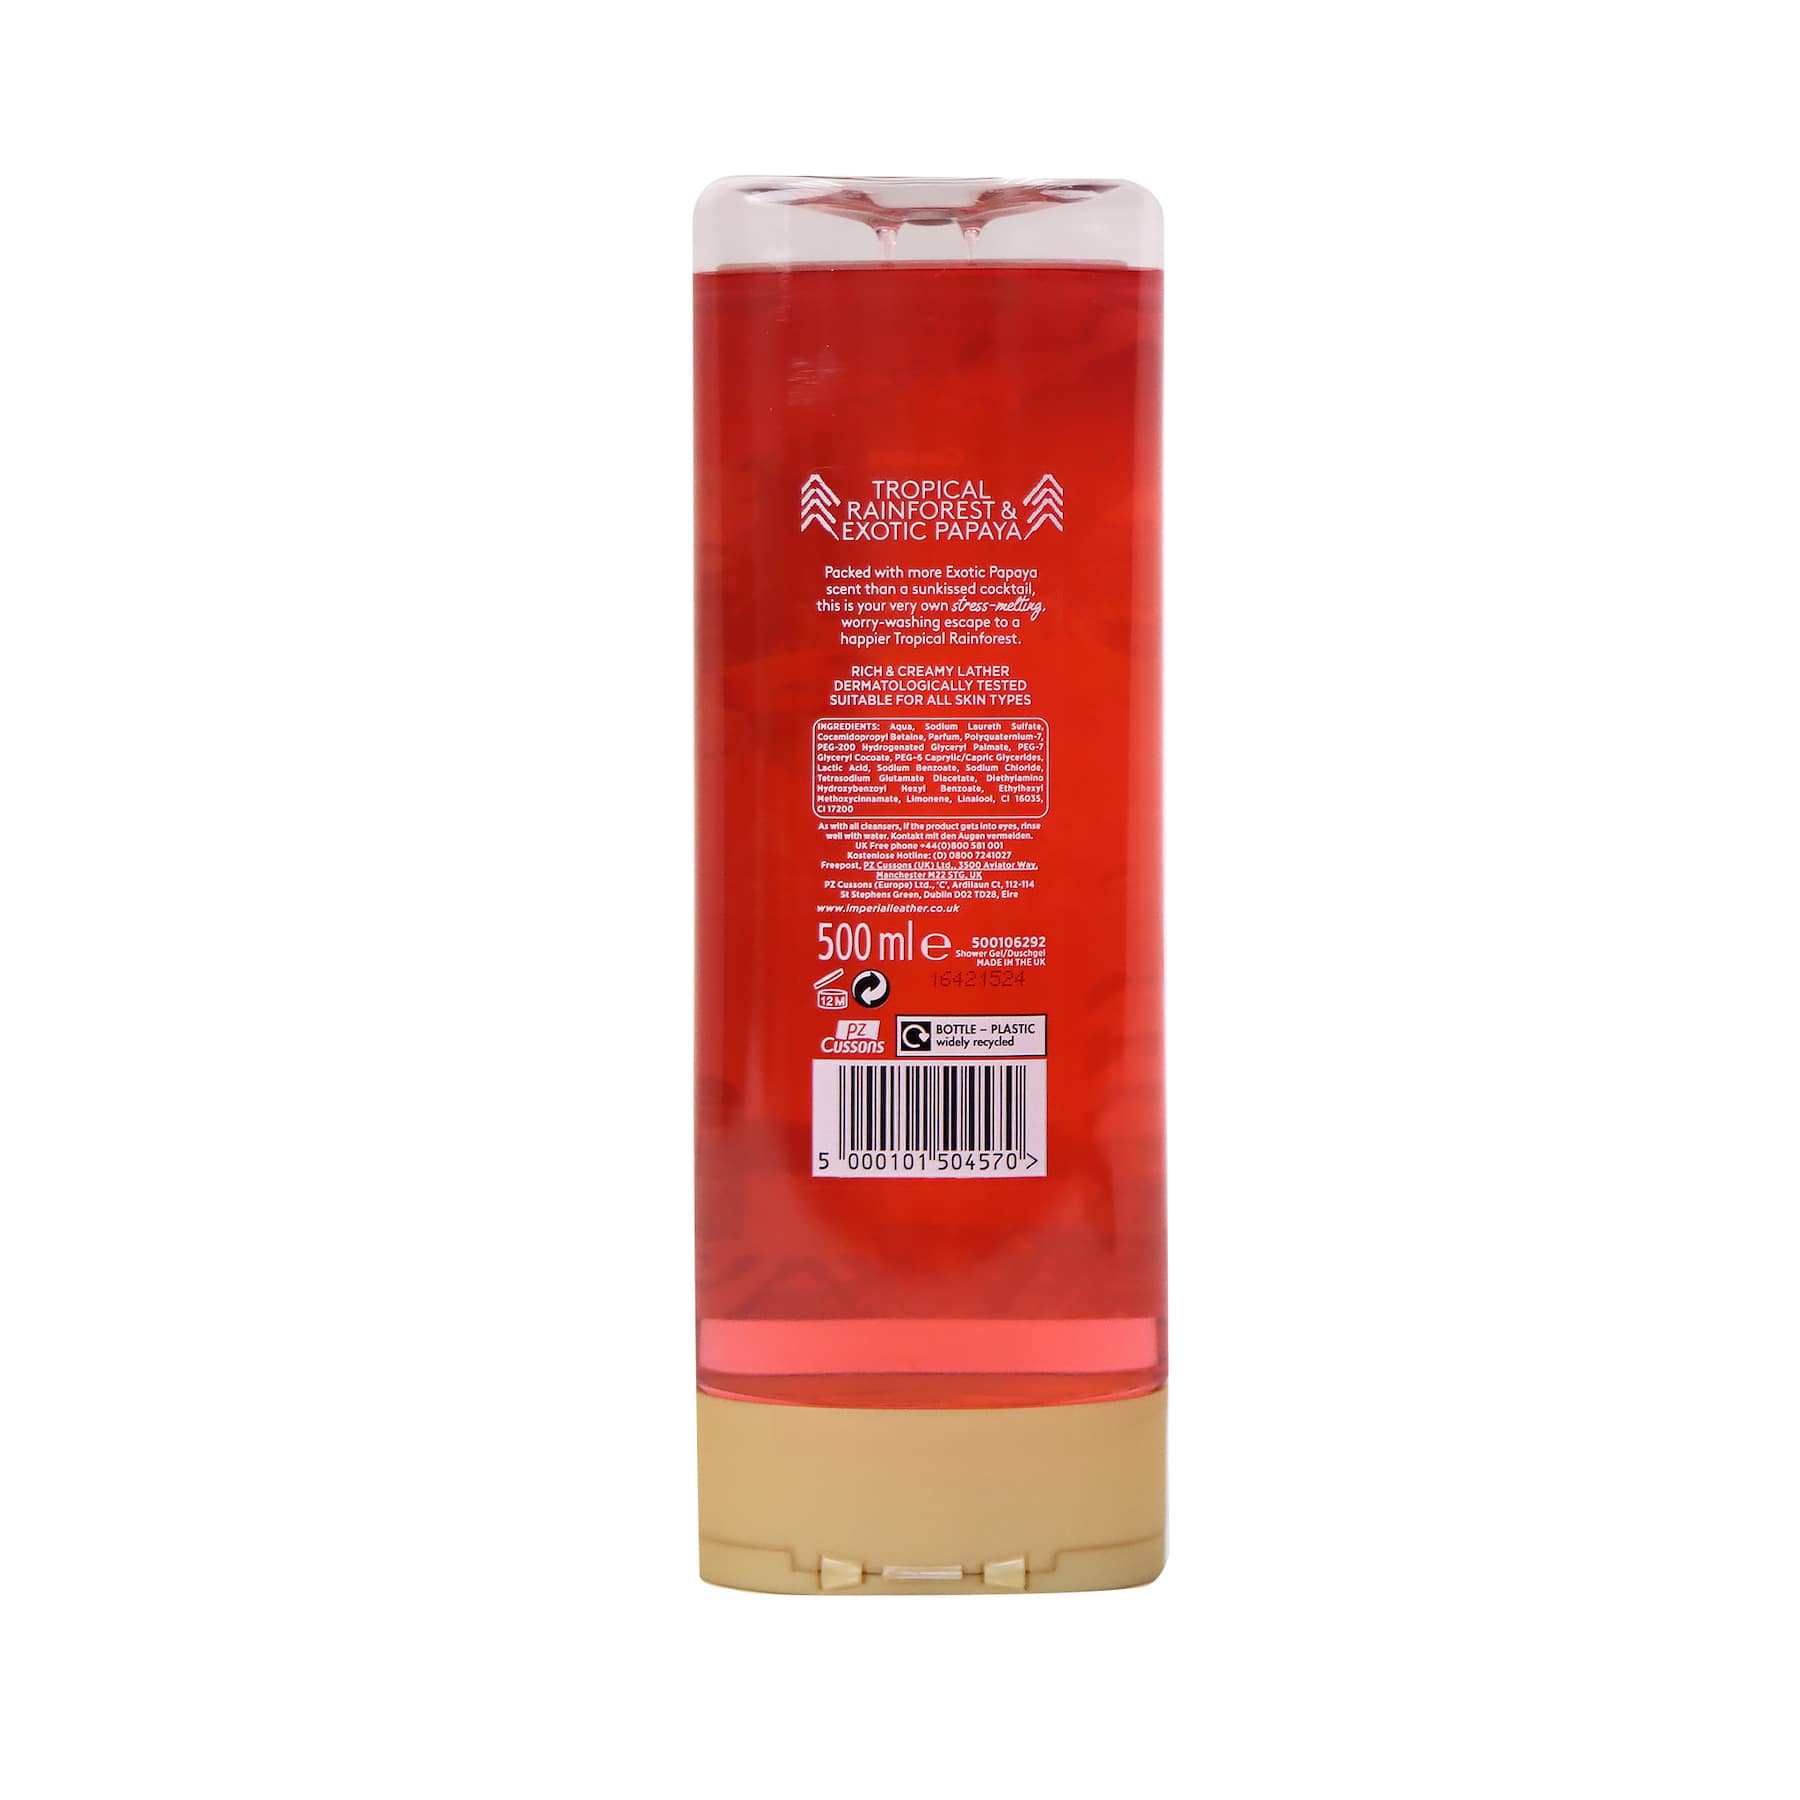 [Cussons] Imperial Leather Tropical Rainforest & Exotic Papaya Shower Gel 500ml